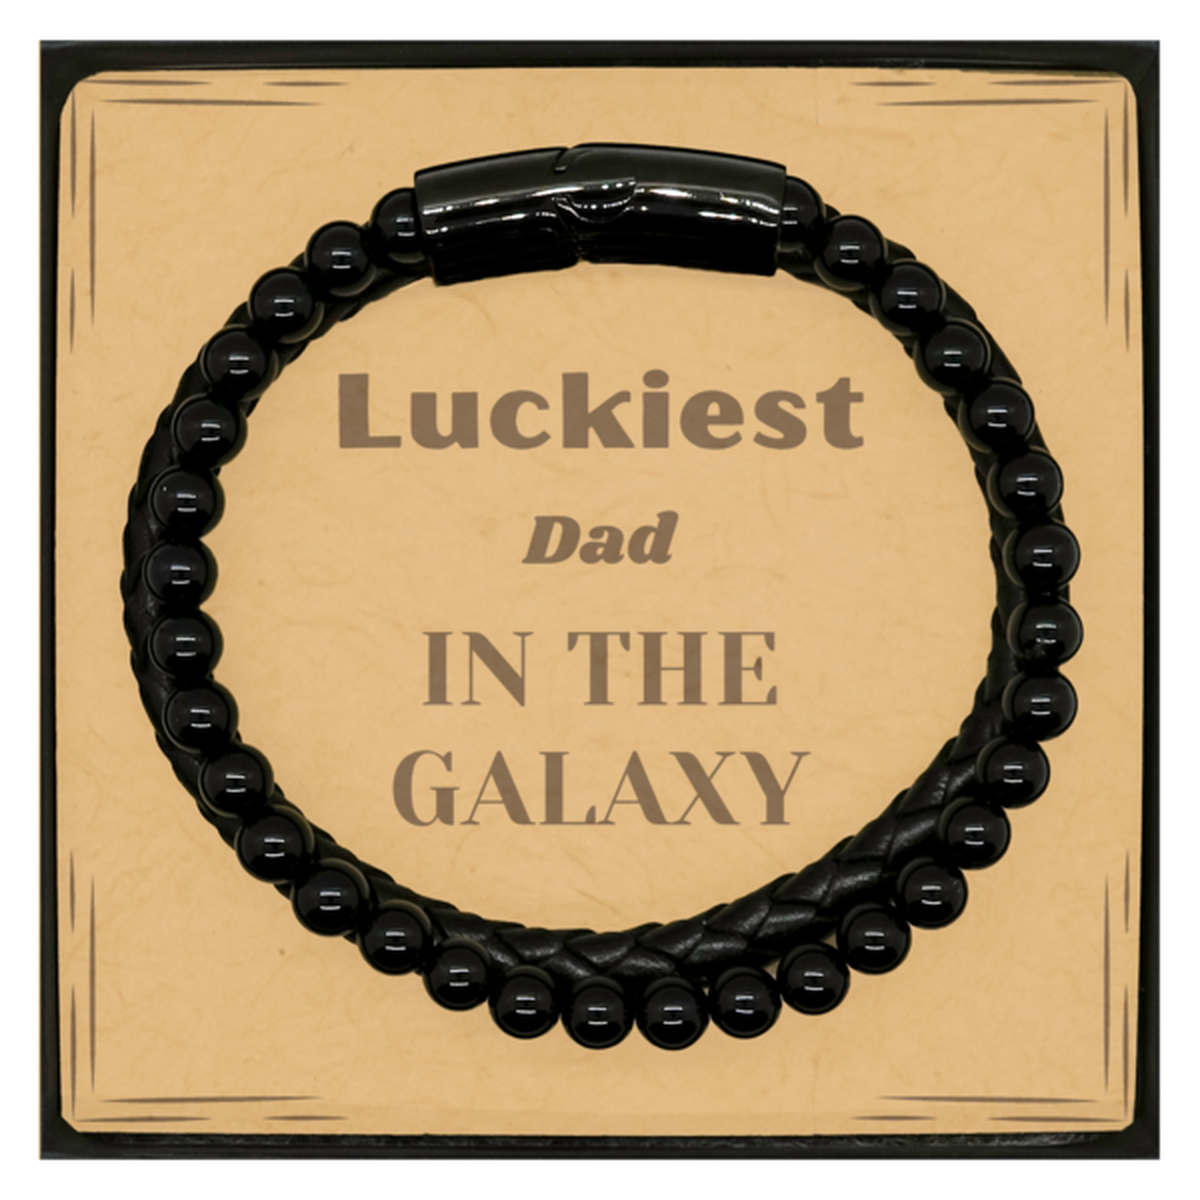 Luckiest Dad in the Galaxy, To My Dad Message Card Gifts, Christmas Dad Stone Leather Bracelets Gifts, X-mas Birthday Unique Gifts For Dad Men Women